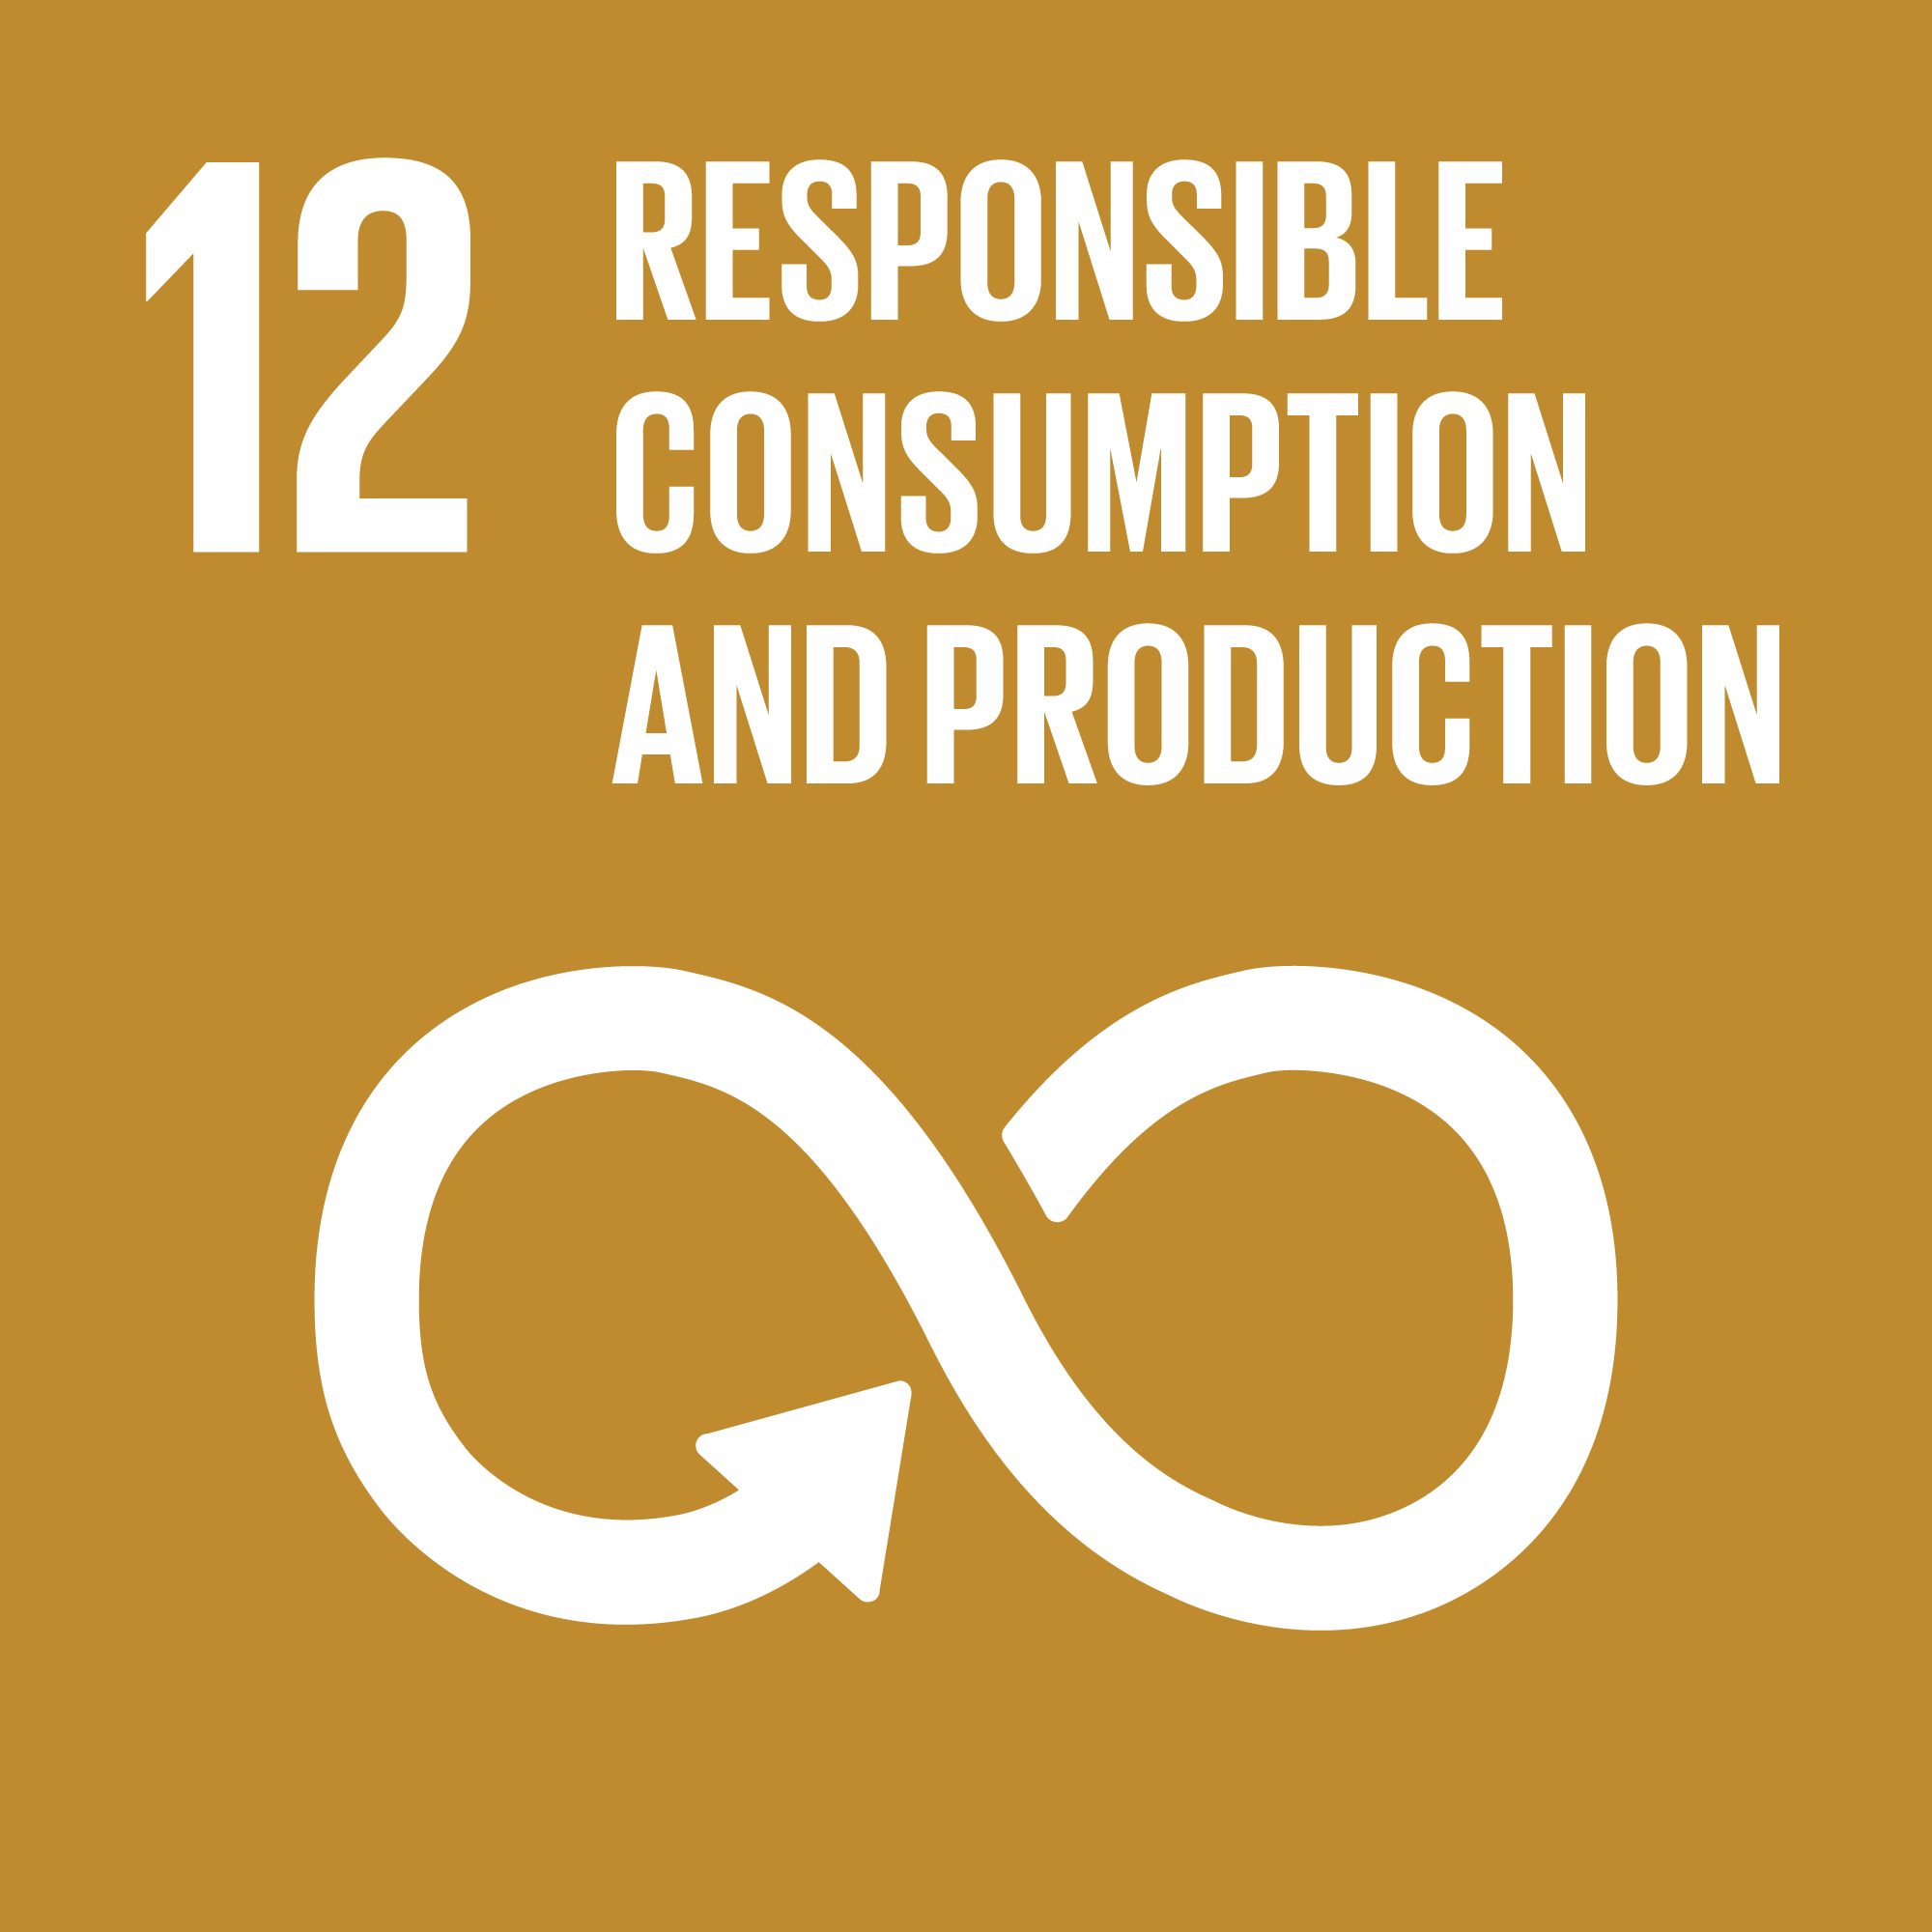 UN sustainability goal number 12